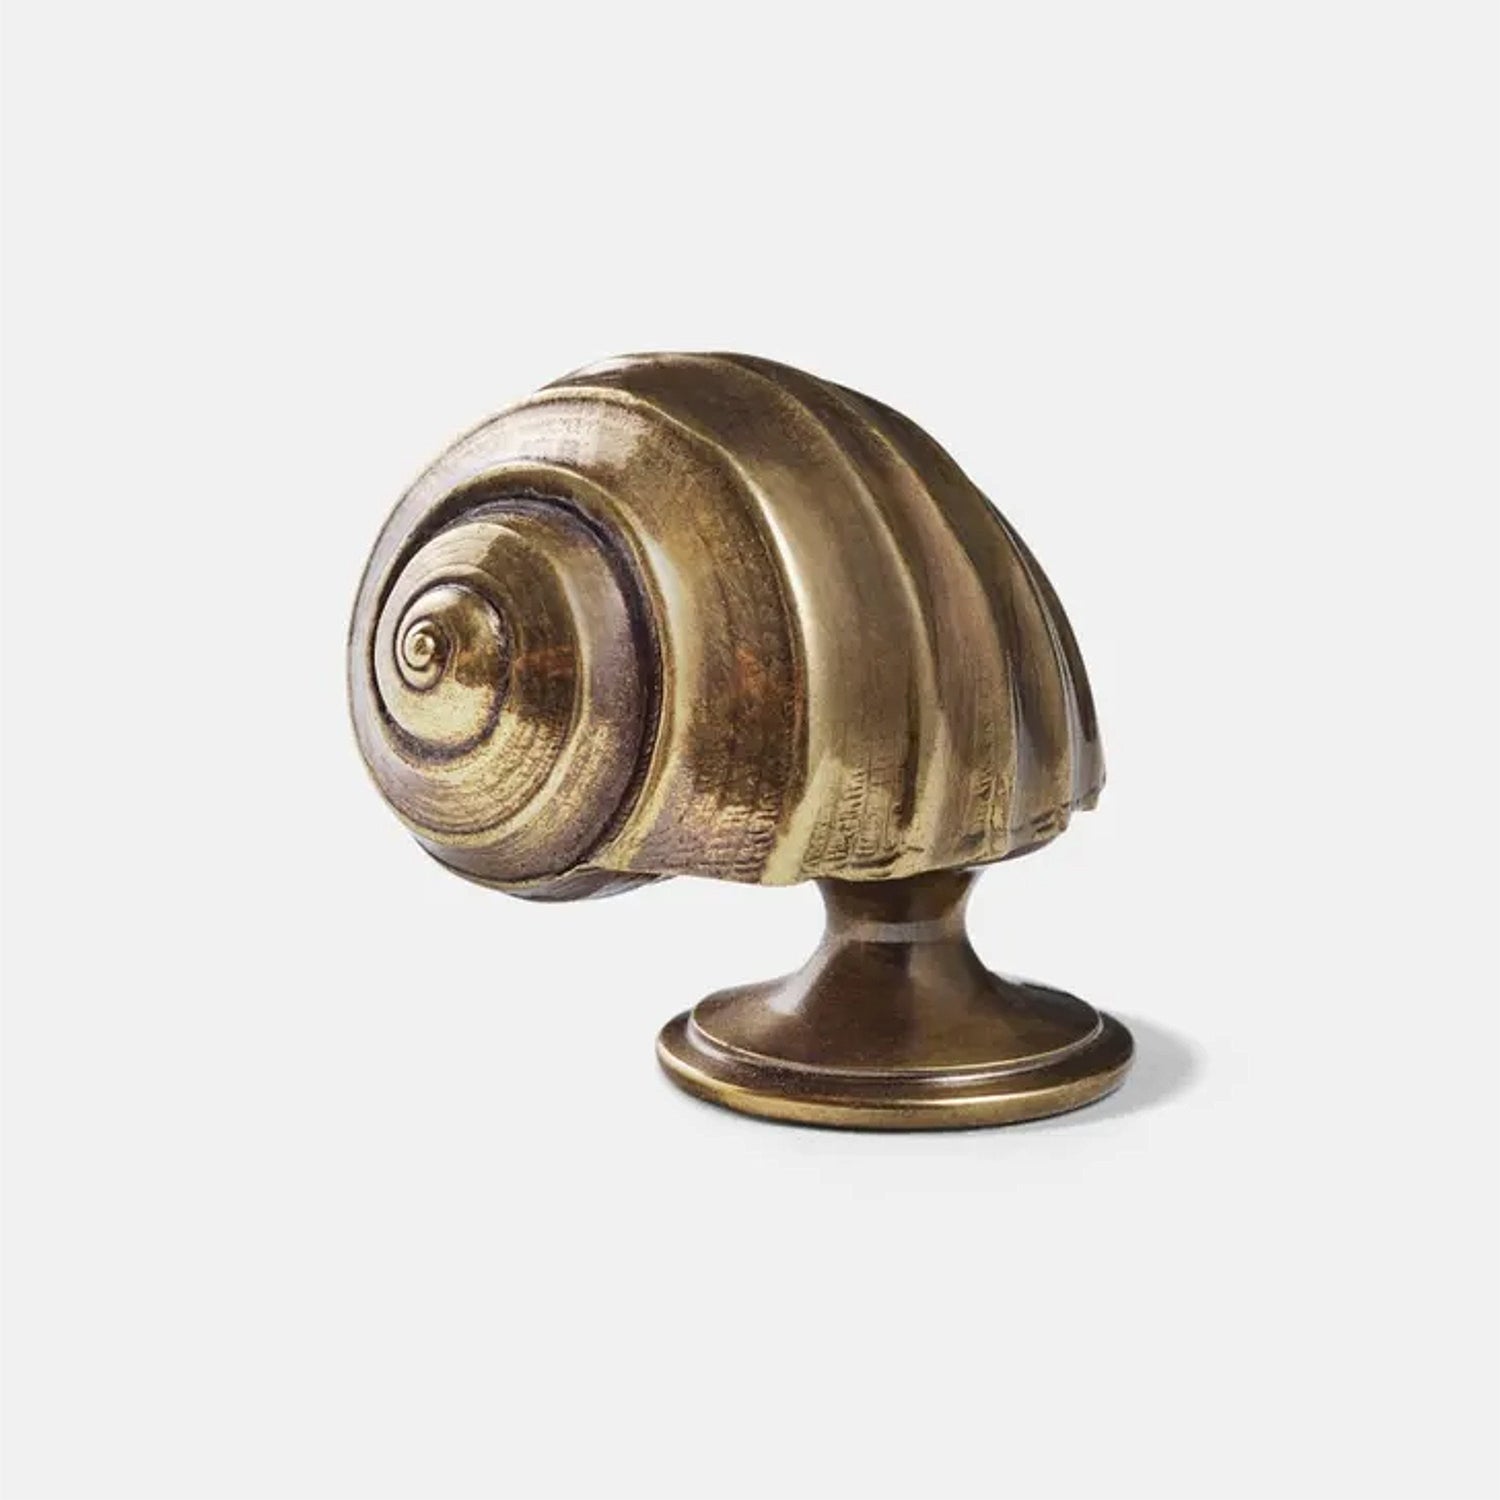 Safari Journal / Blog by Safari Fusion | Whimsical Hardware | Moon Snail cupboard knob in an Antique Brass finish by Collier Webb, England